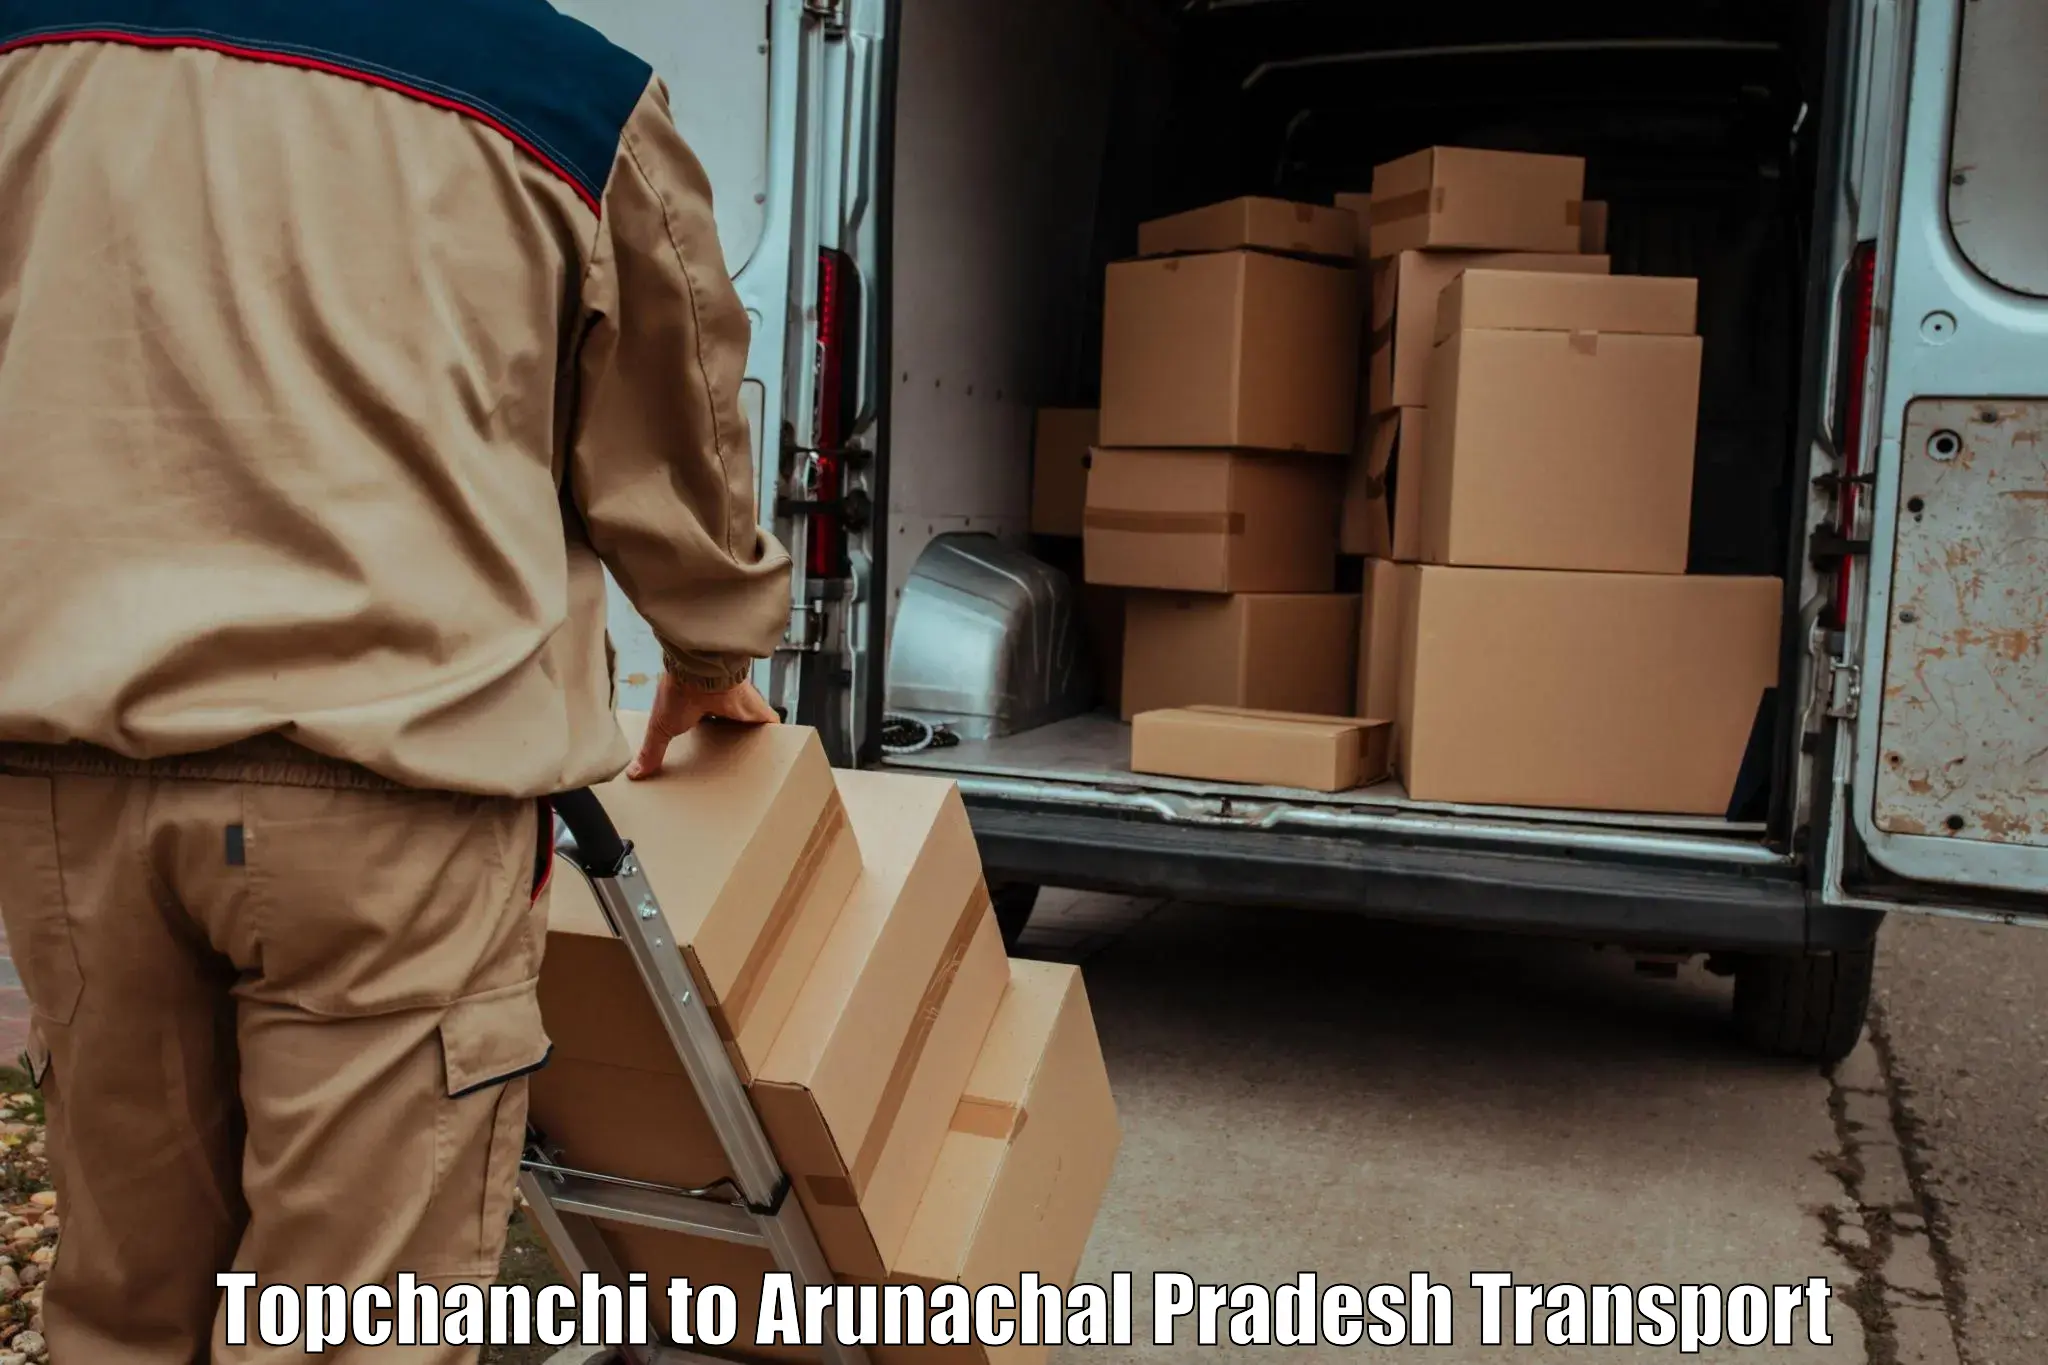 Lorry transport service Topchanchi to Papum Pare